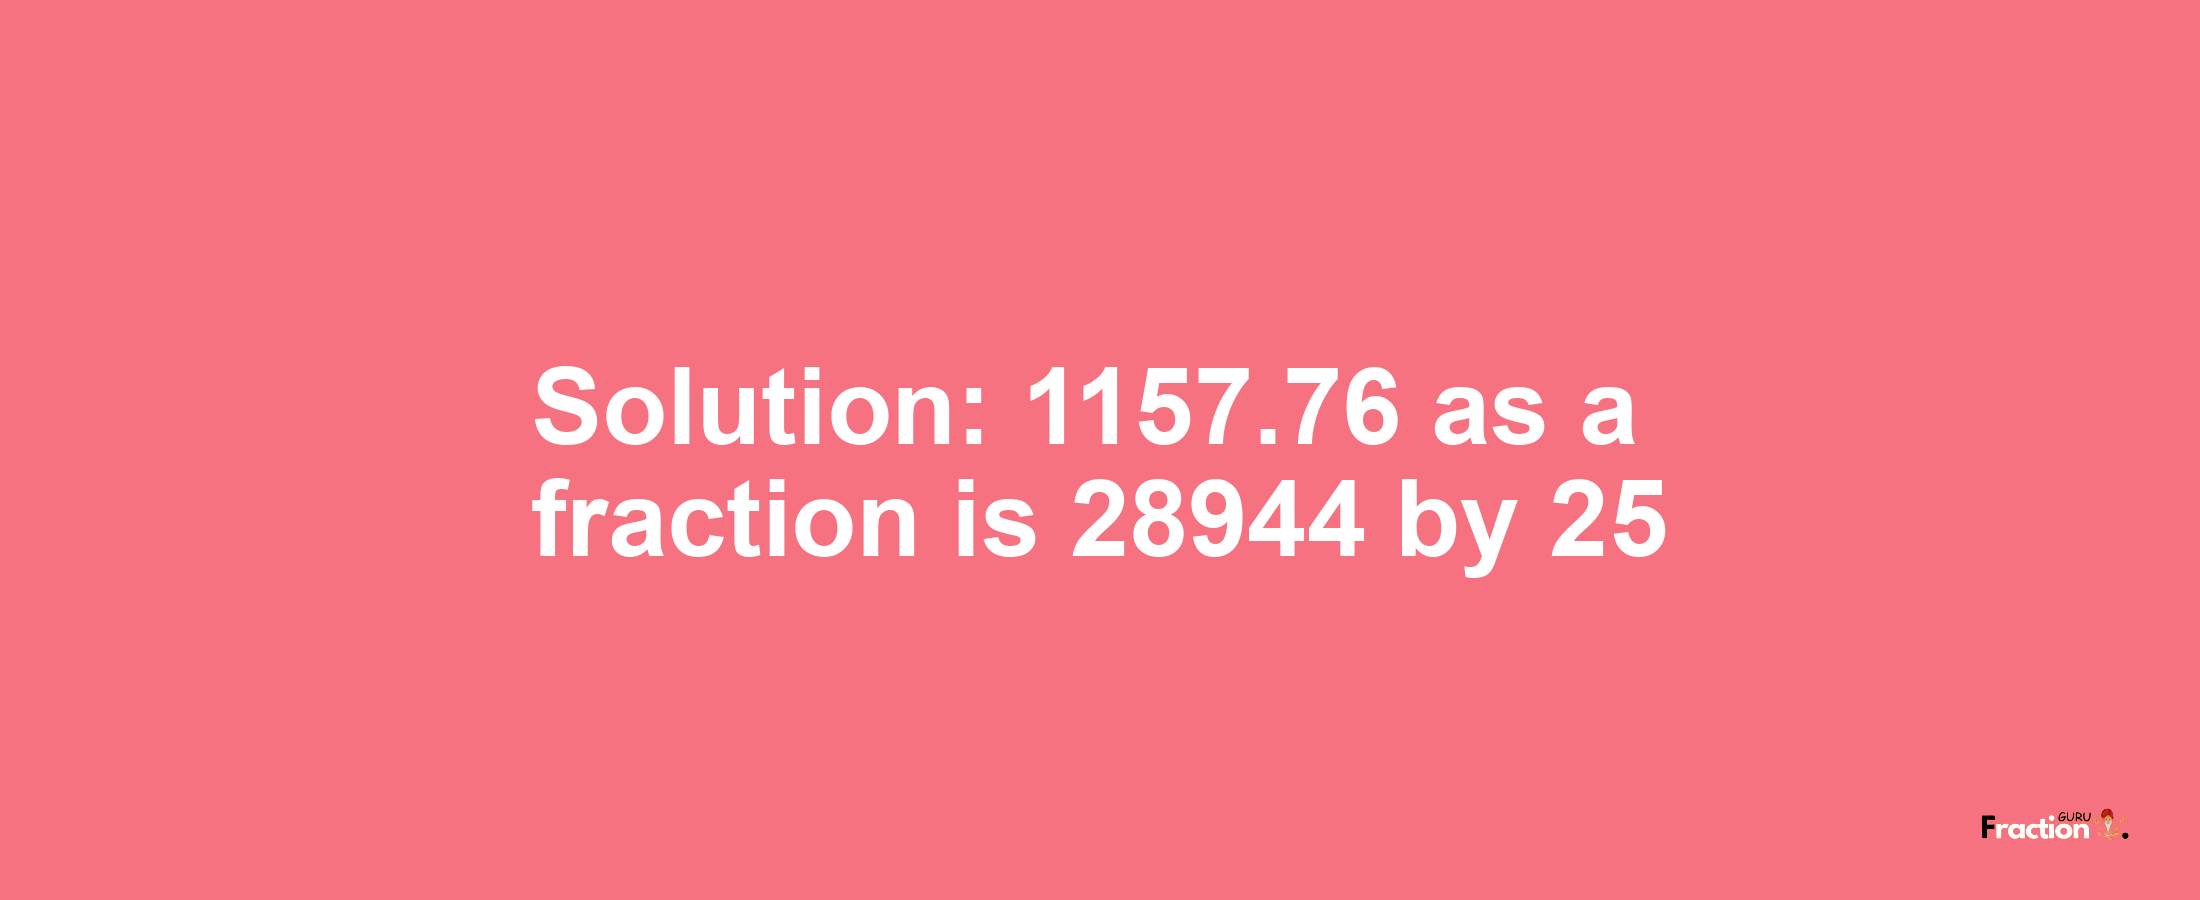 Solution:1157.76 as a fraction is 28944/25